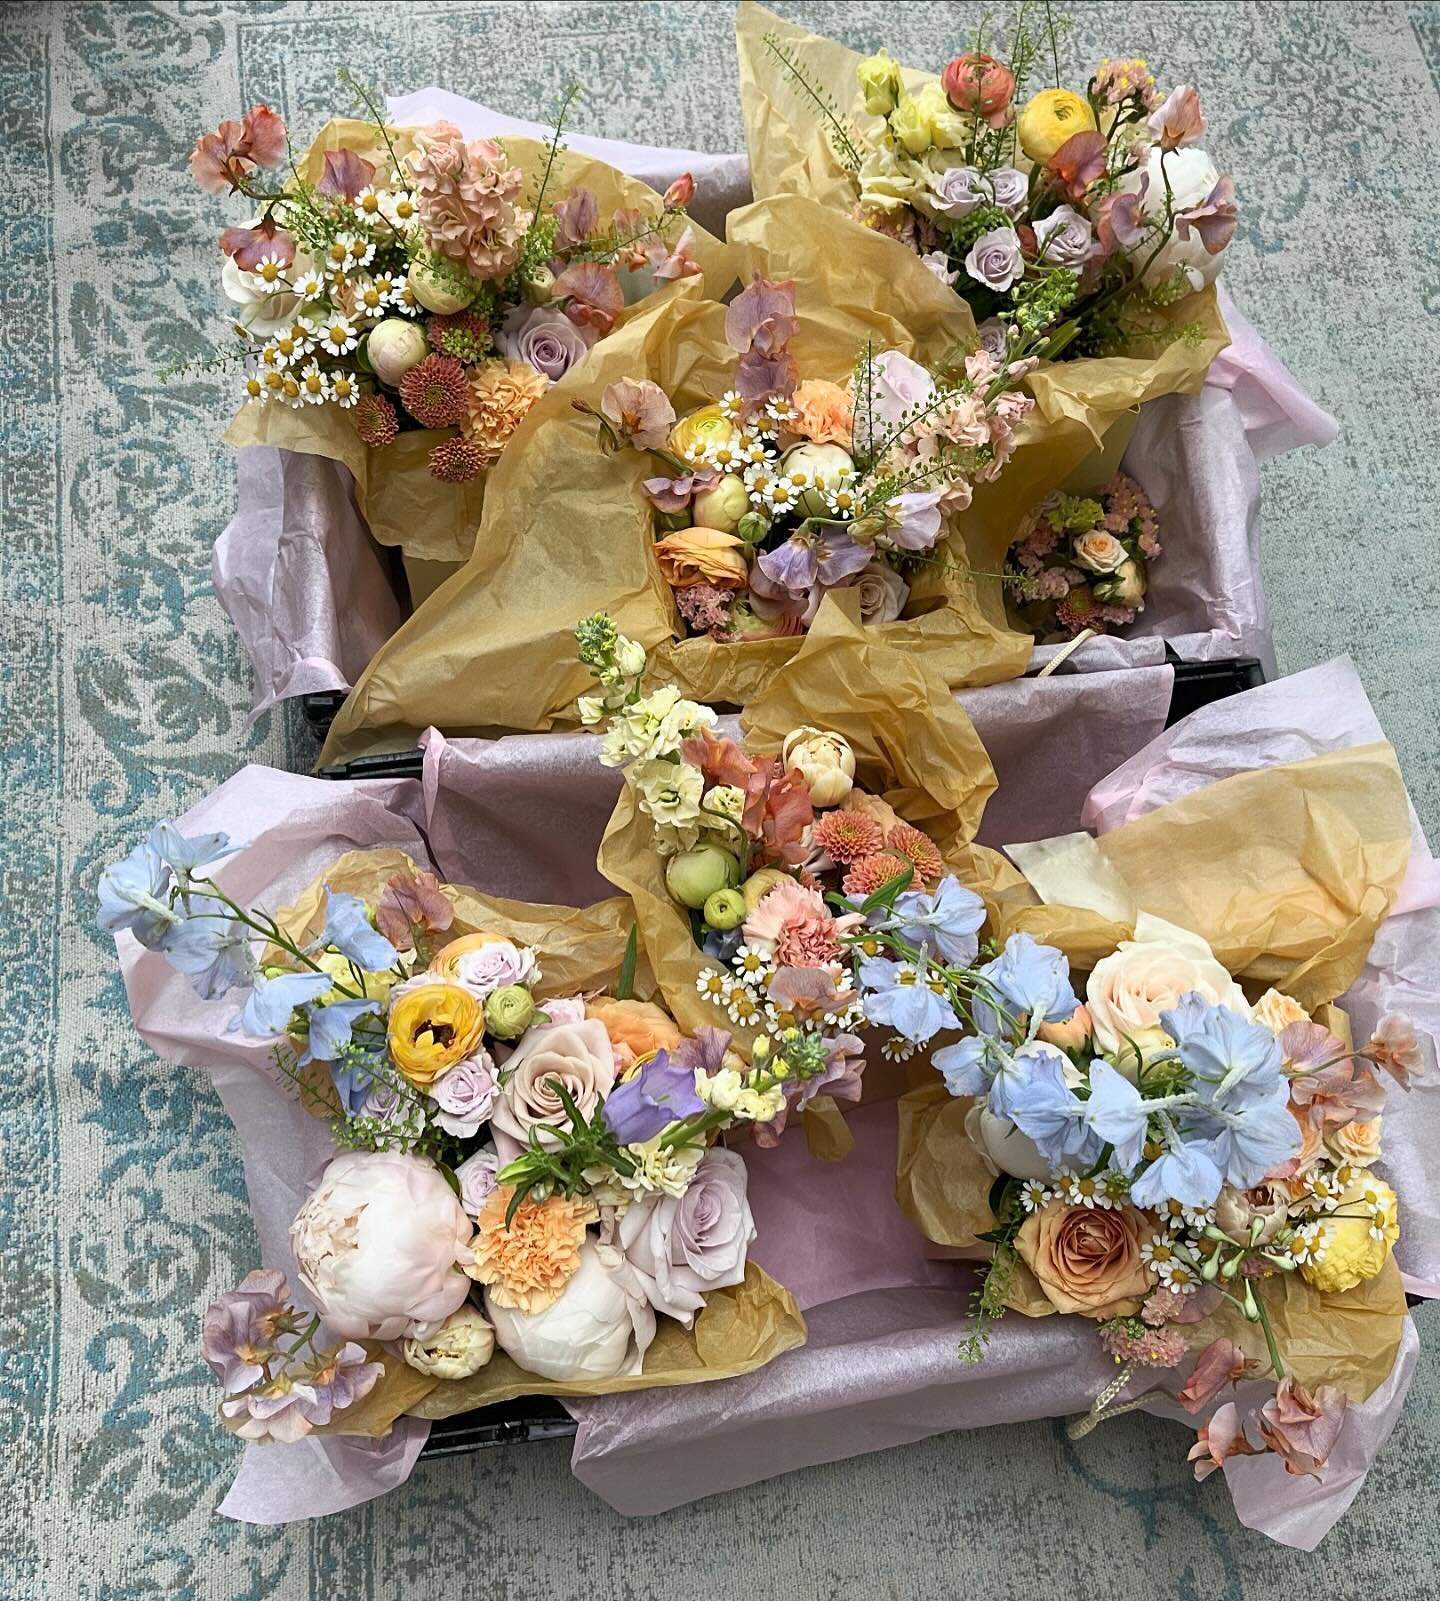 ✨ Maids ✨ 

Making the bridal flowers is one of my very favourite part of wedding work, and I really loved designing this palette of lemons, peaches, lilacs and baby blues for this weekend&rsquo;s wedding. Florists, what&rsquo;s your current fave pal